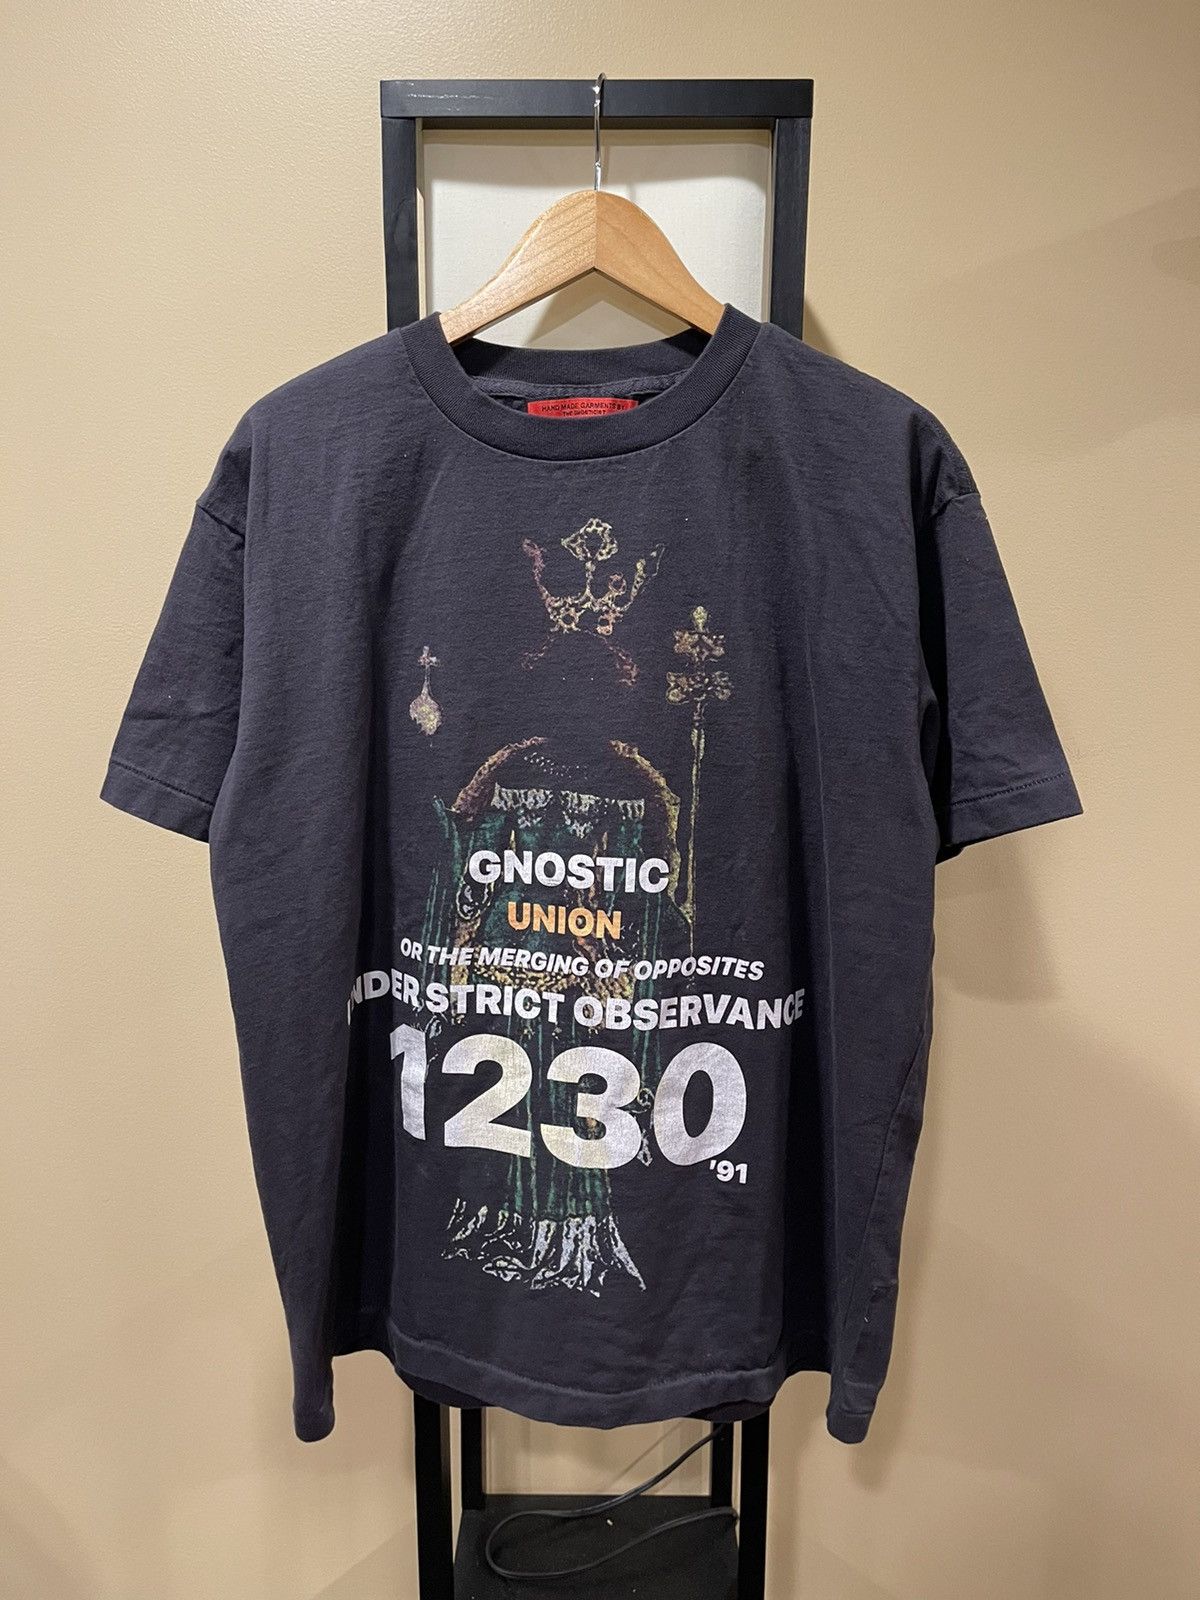 RRR-123 Clothing: Curated Shirts, Jeans, Shoes & More | Grailed